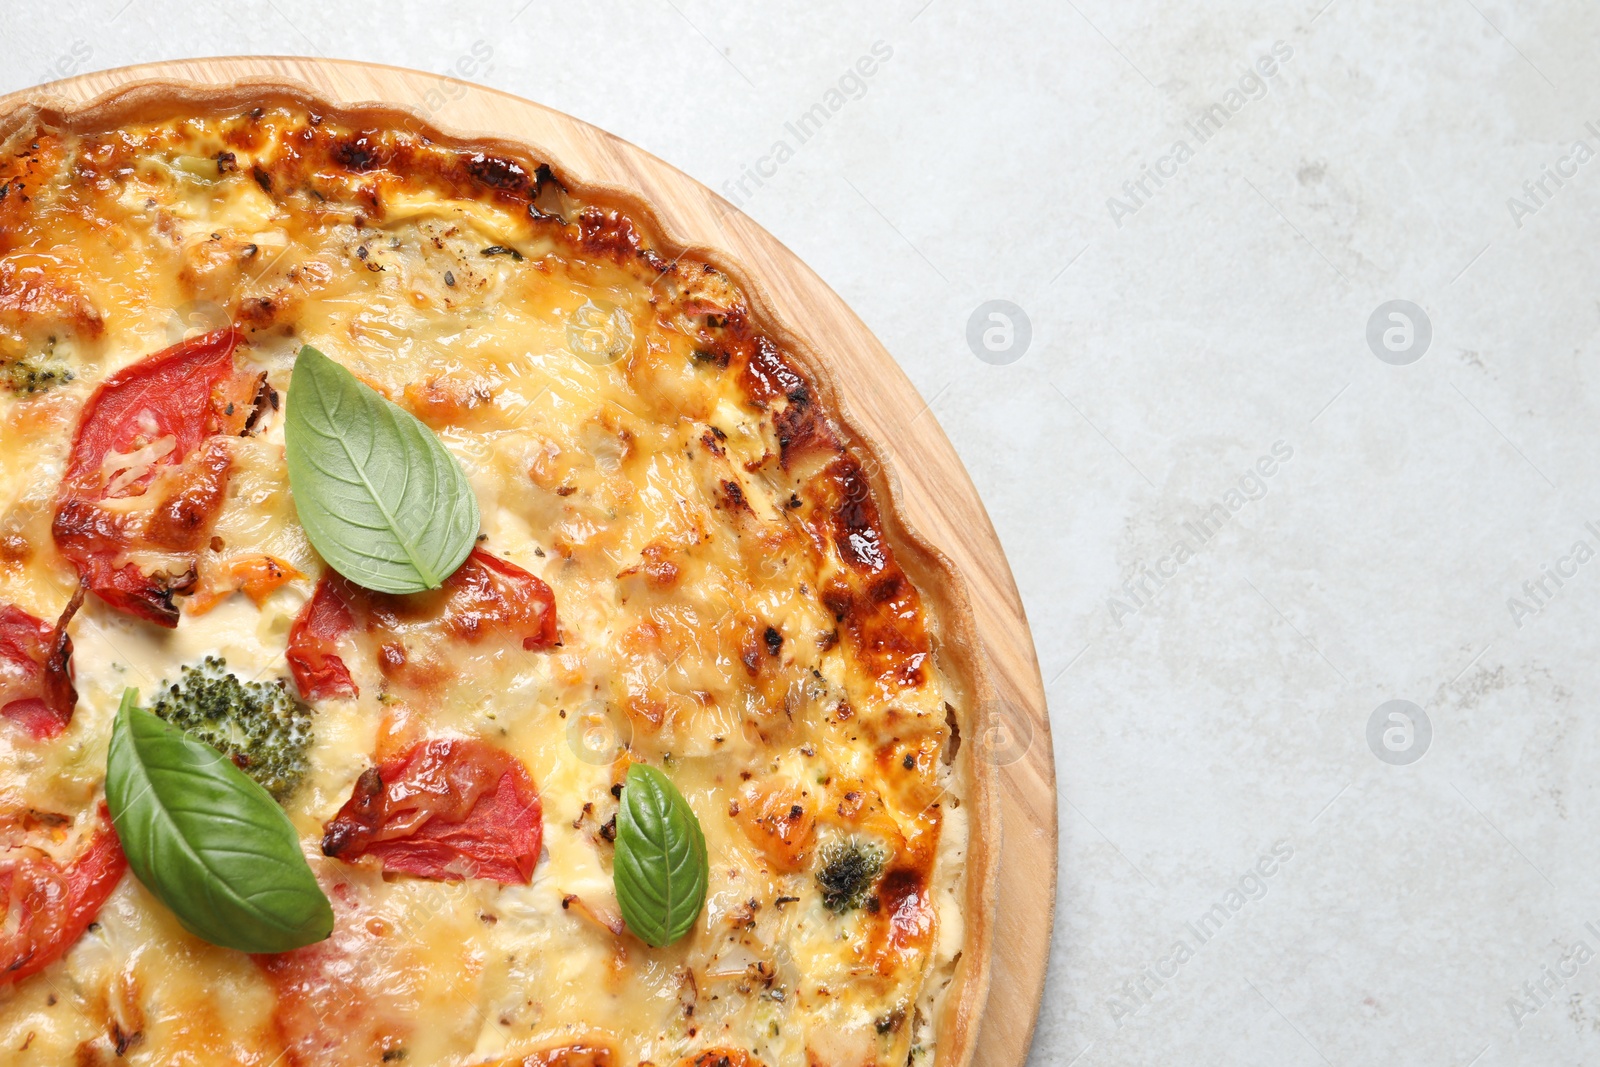 Photo of Tasty quiche with cheese, tomatoes and basil leaves on light grey table, top view. Space for text